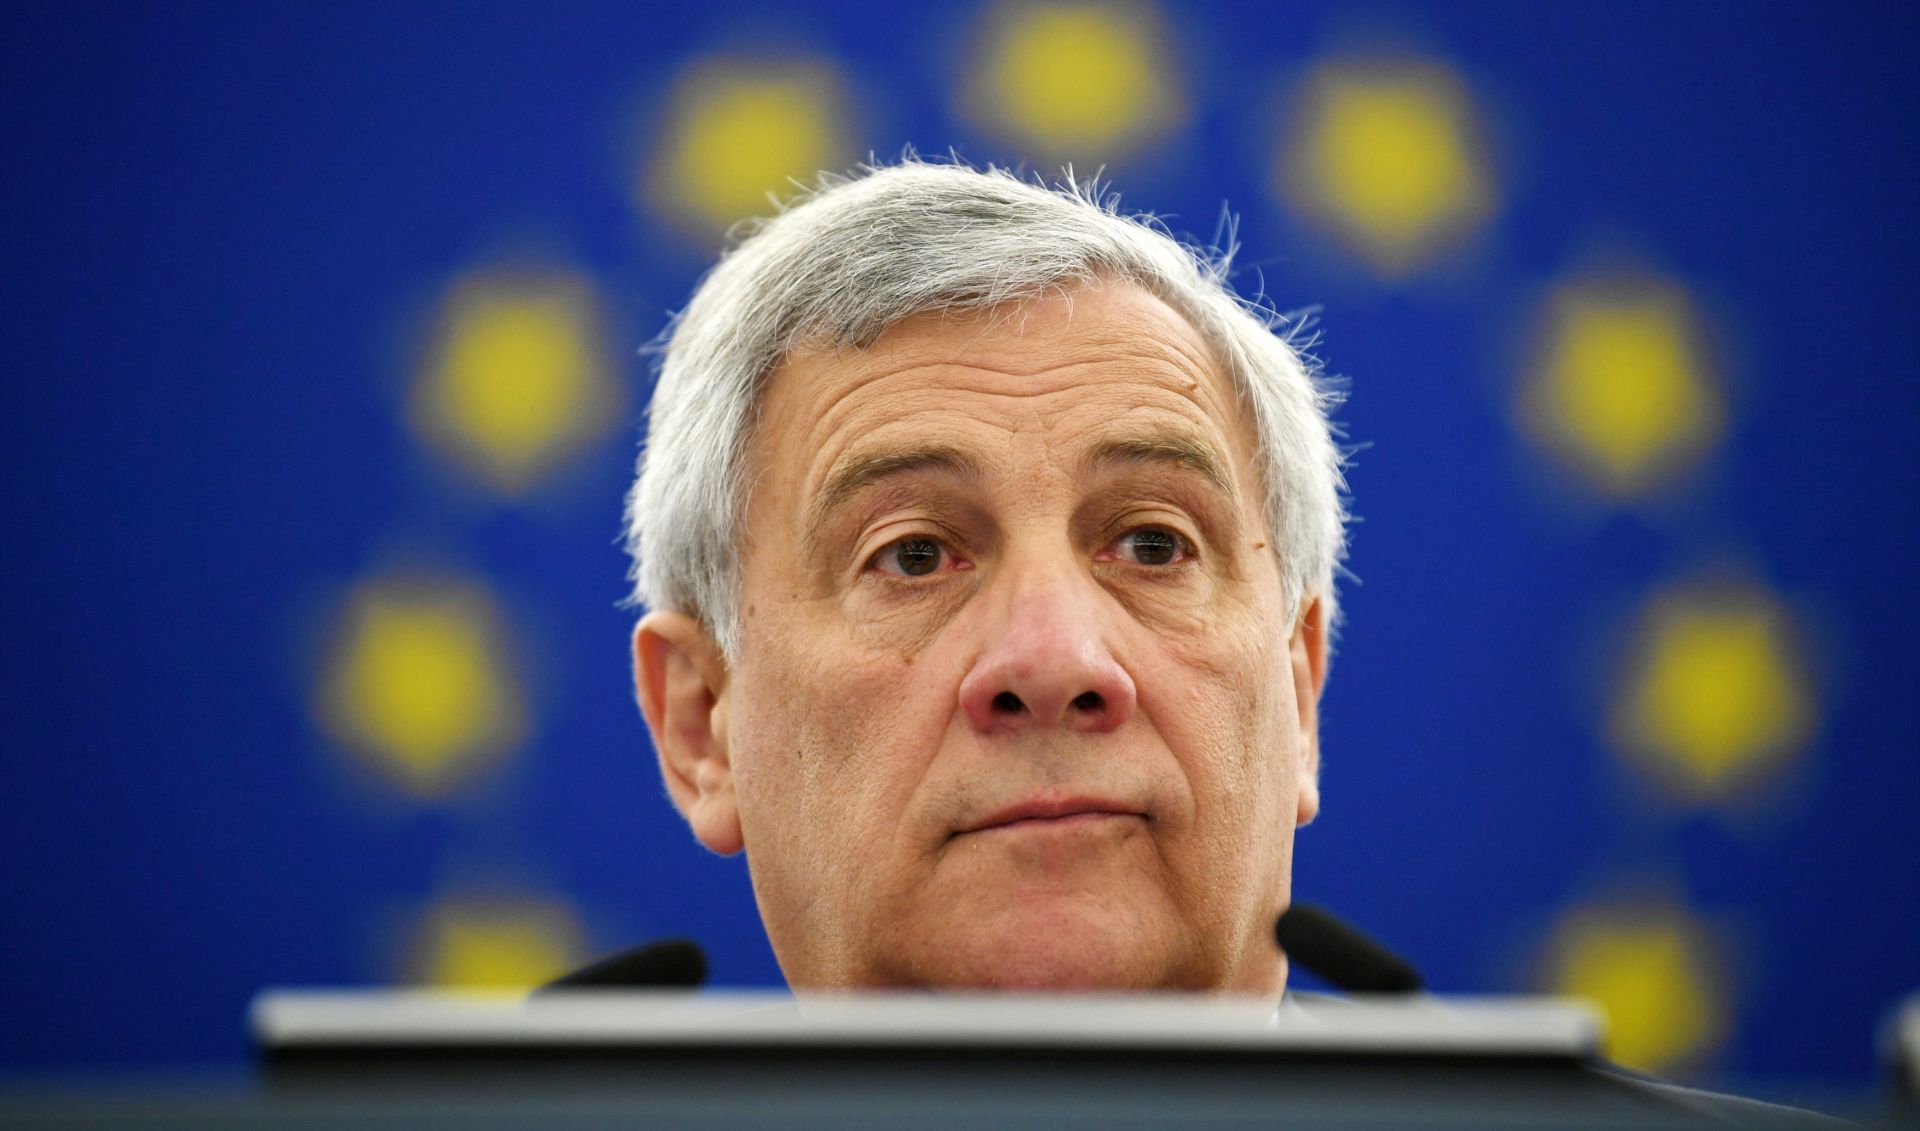 epa07691163 Antonio Tajani, President of the European Parliament, listens prior the vote on the Parliament's President at the European Parliament, in Strasbourg, France, 03 July 2019. A vote for the new EU Parliament's presidency had been postponed to 03 July 2019 following the parliament's inaugural session on 02 July.  EPA/PATRICK SEEGER